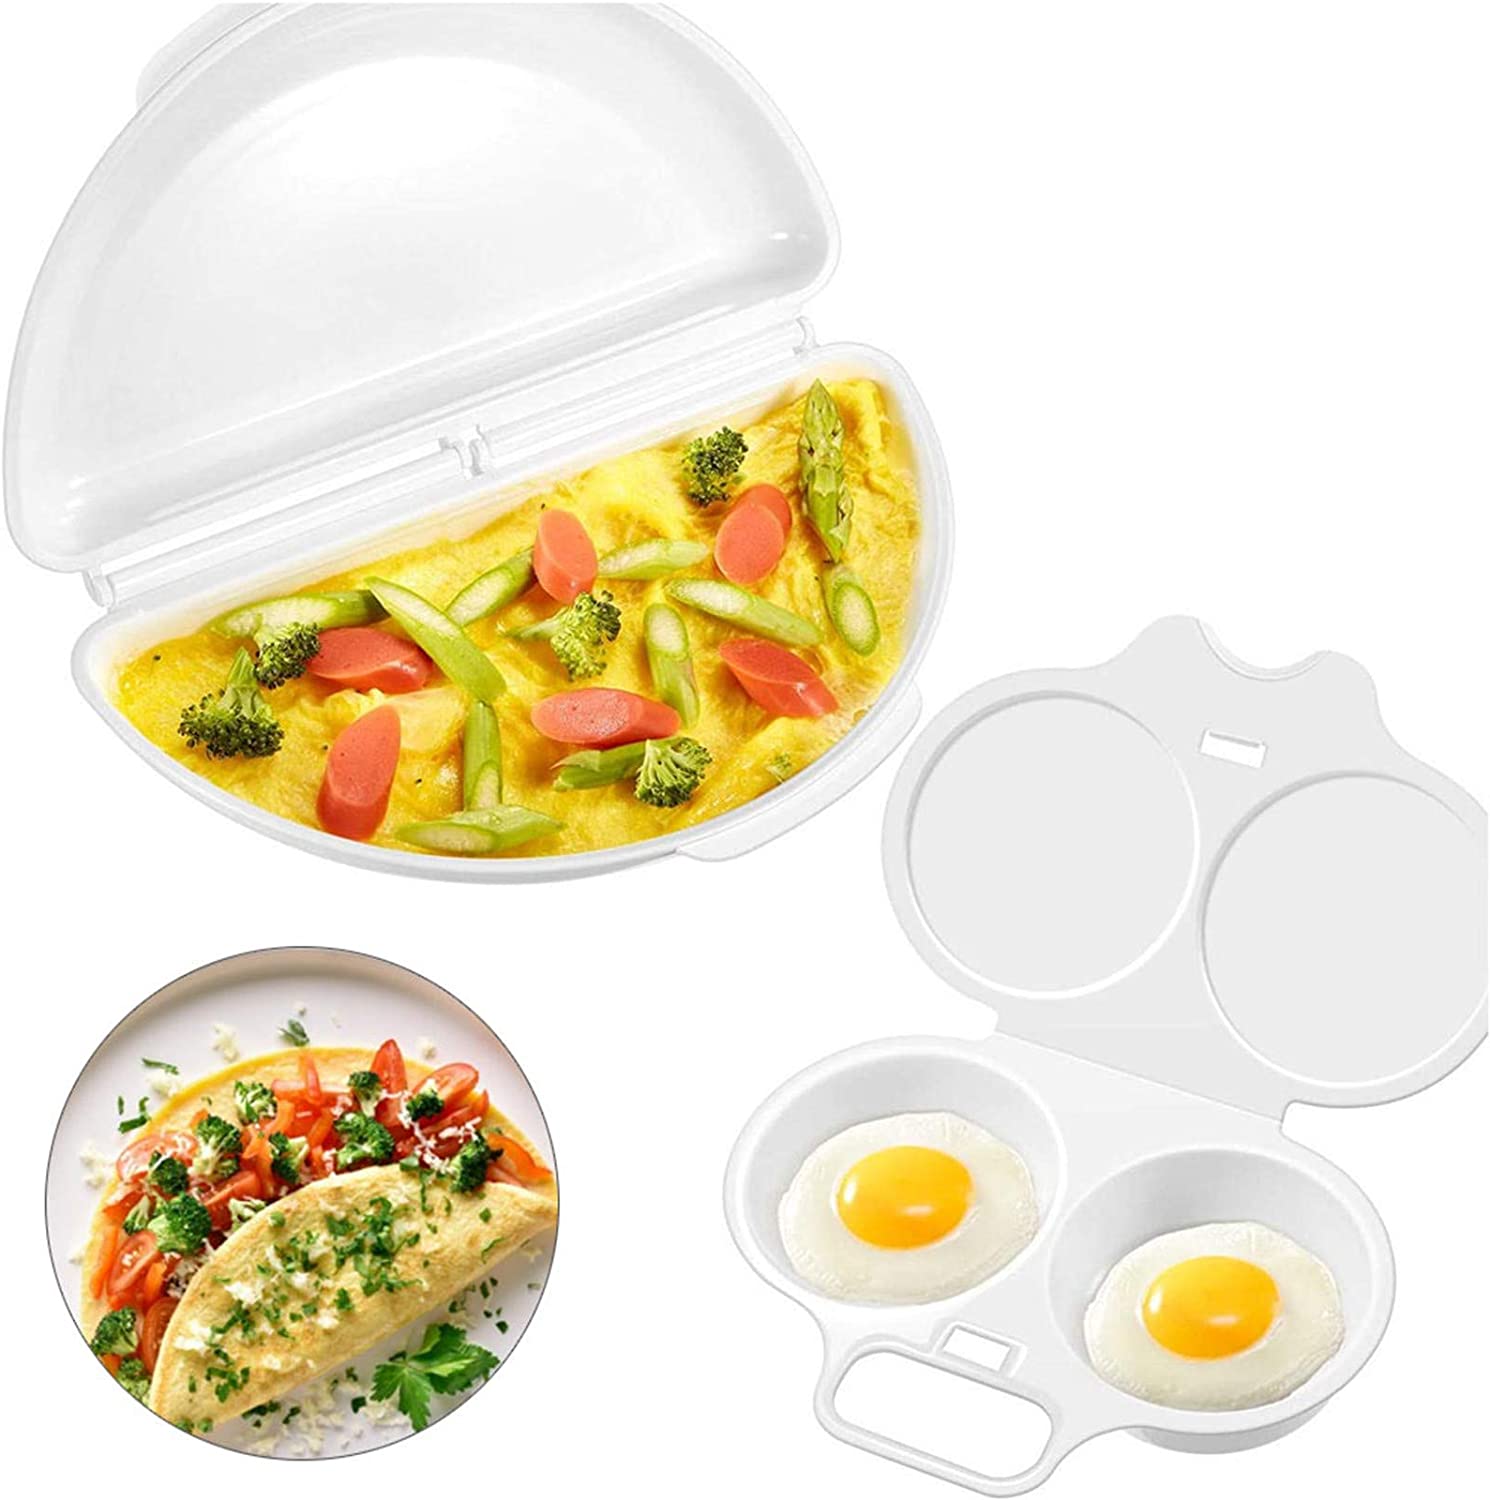 ManYee Omelet Microwave Maker and 2 Egg Boilers Microwave Egg Boiler Set for Fast and Healthy Breakfast